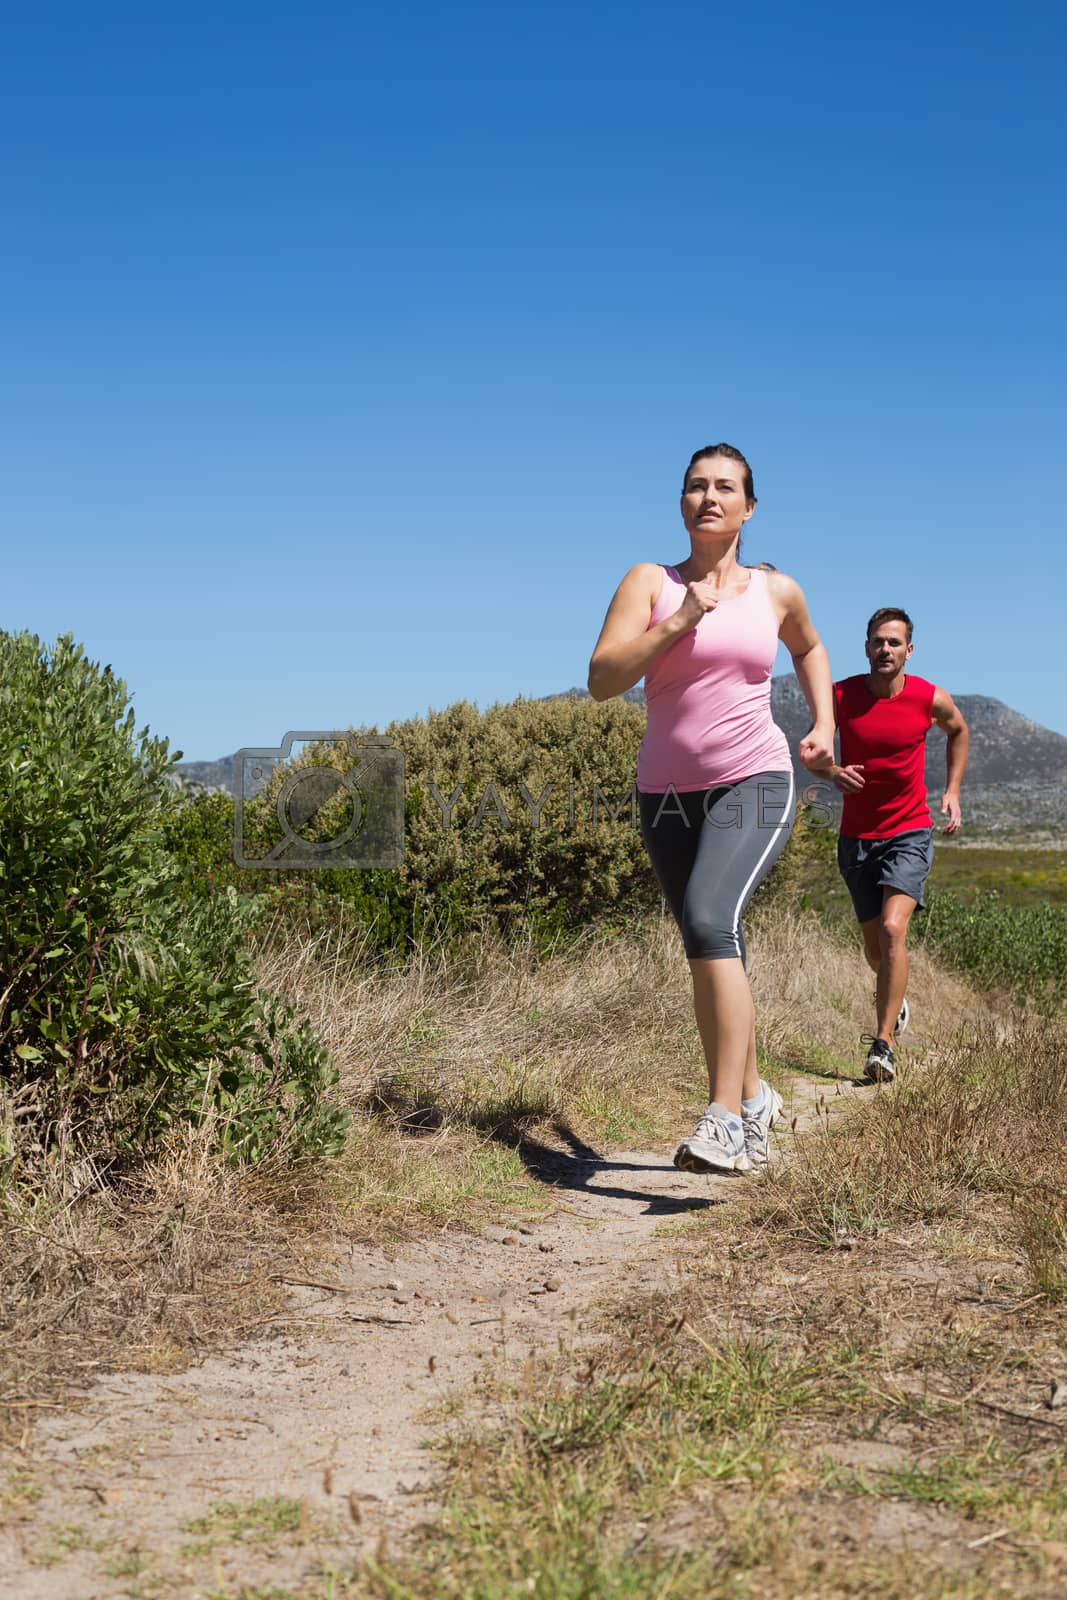 Royalty free image of Active couple jogging on country terrain by Wavebreakmedia